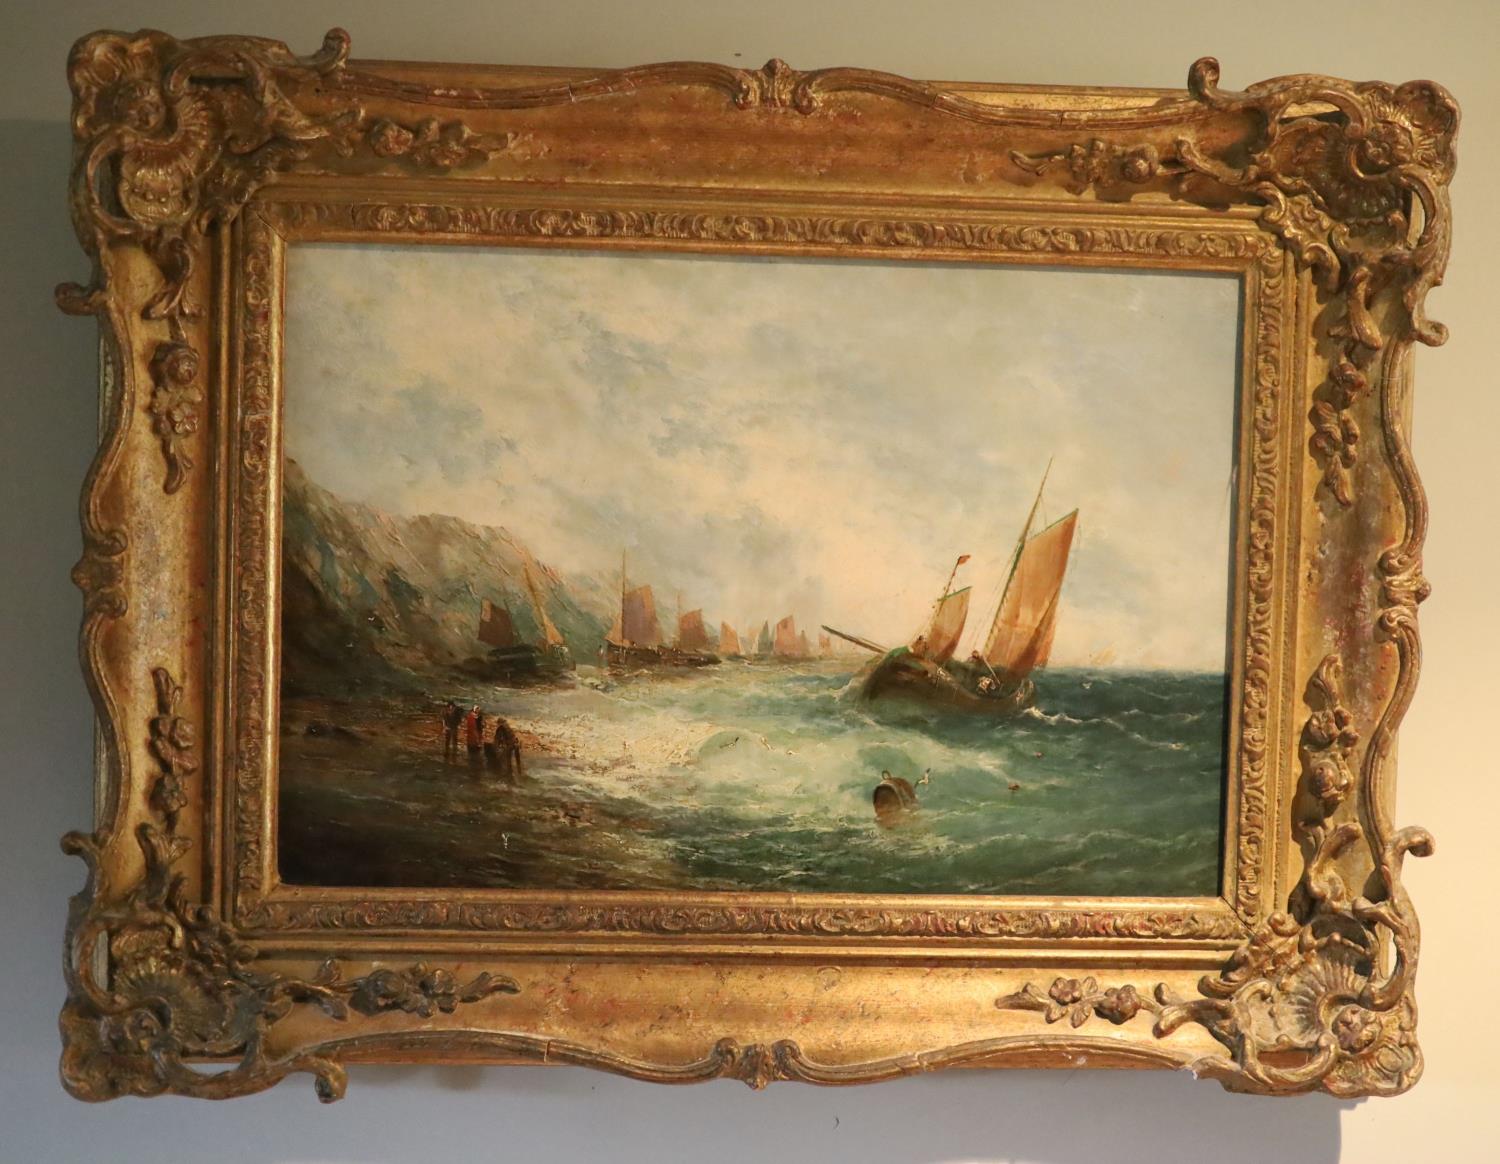 19th century English School, oil on canvas, Fishing boats along the coast, indistinctly signed, 26 x - Image 2 of 2